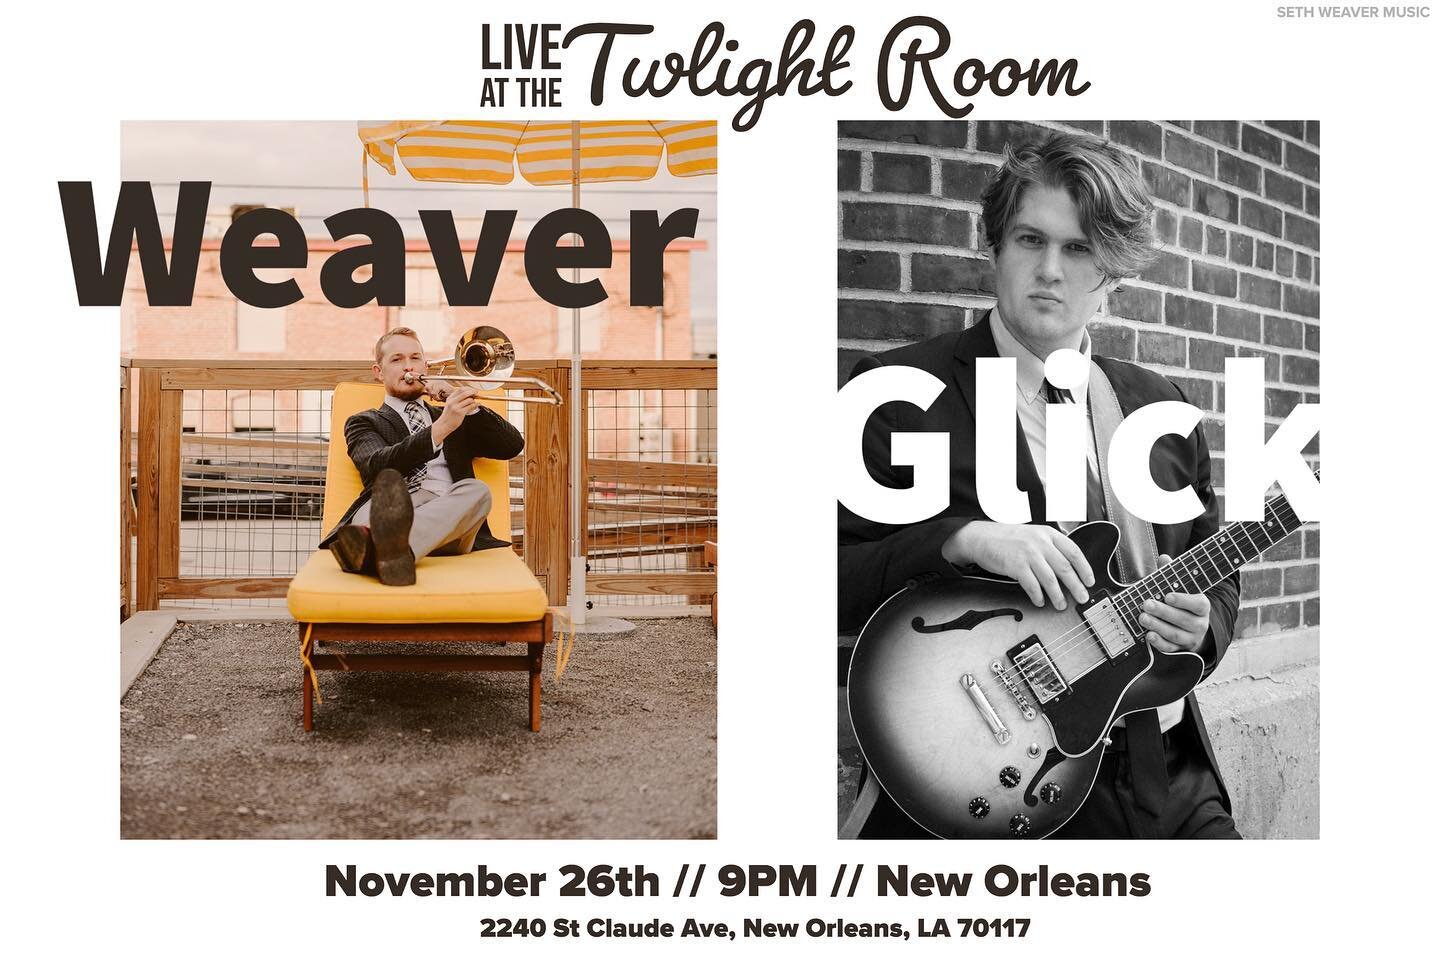 Excited to announce a new show in New Orleans the day AFTER Thanksgiving on November 26th! Aleksi Glick and I will be playing at the Twilight Room  @allways_cabaret_club. Ticket link in bio! ❤️